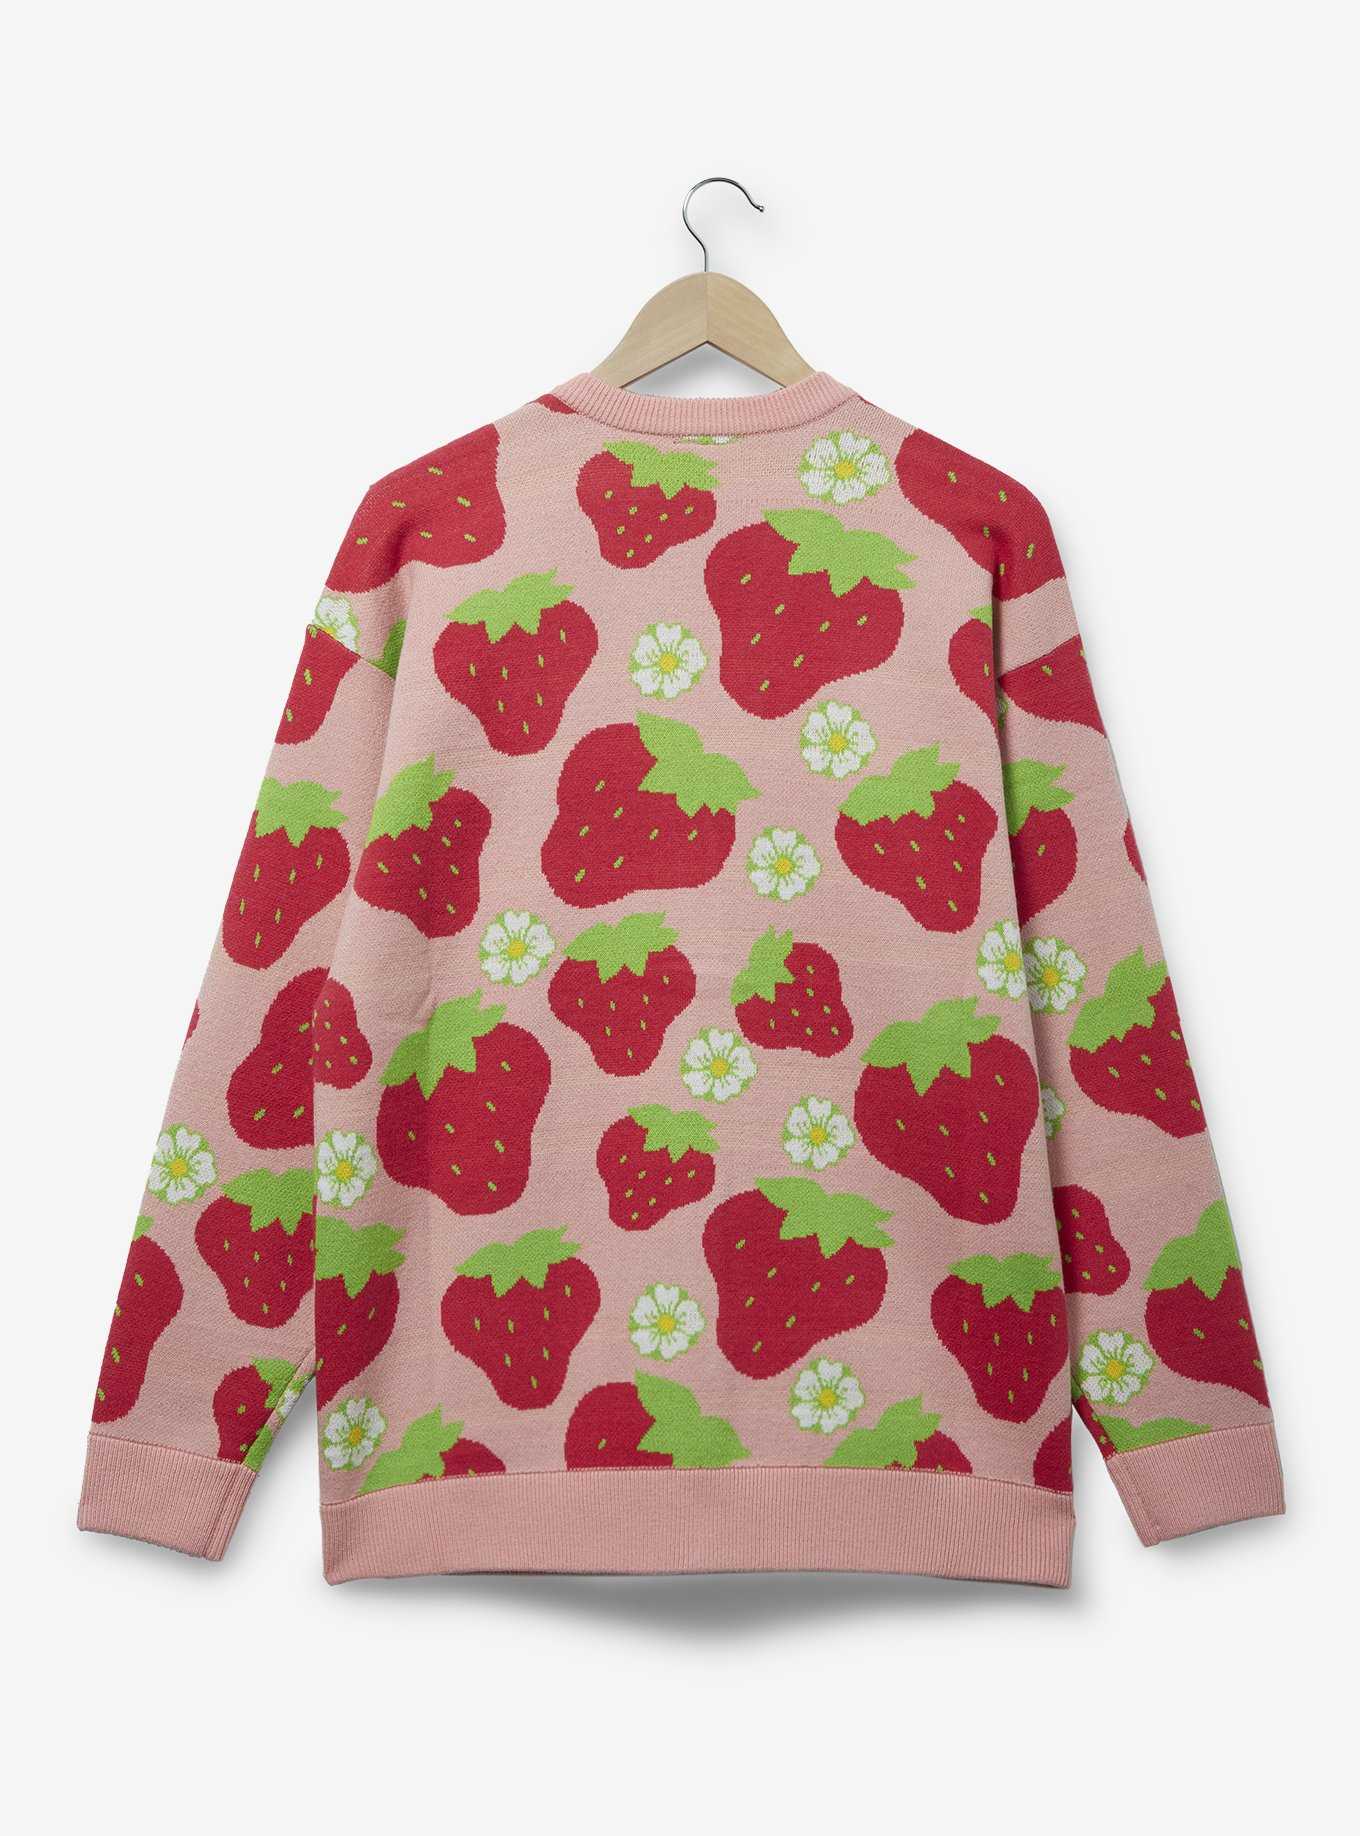 Strawberry Shortcake Allover Strawberry Print Women's Plus Size Cardigan - BoxLunch Exclusive, , hi-res